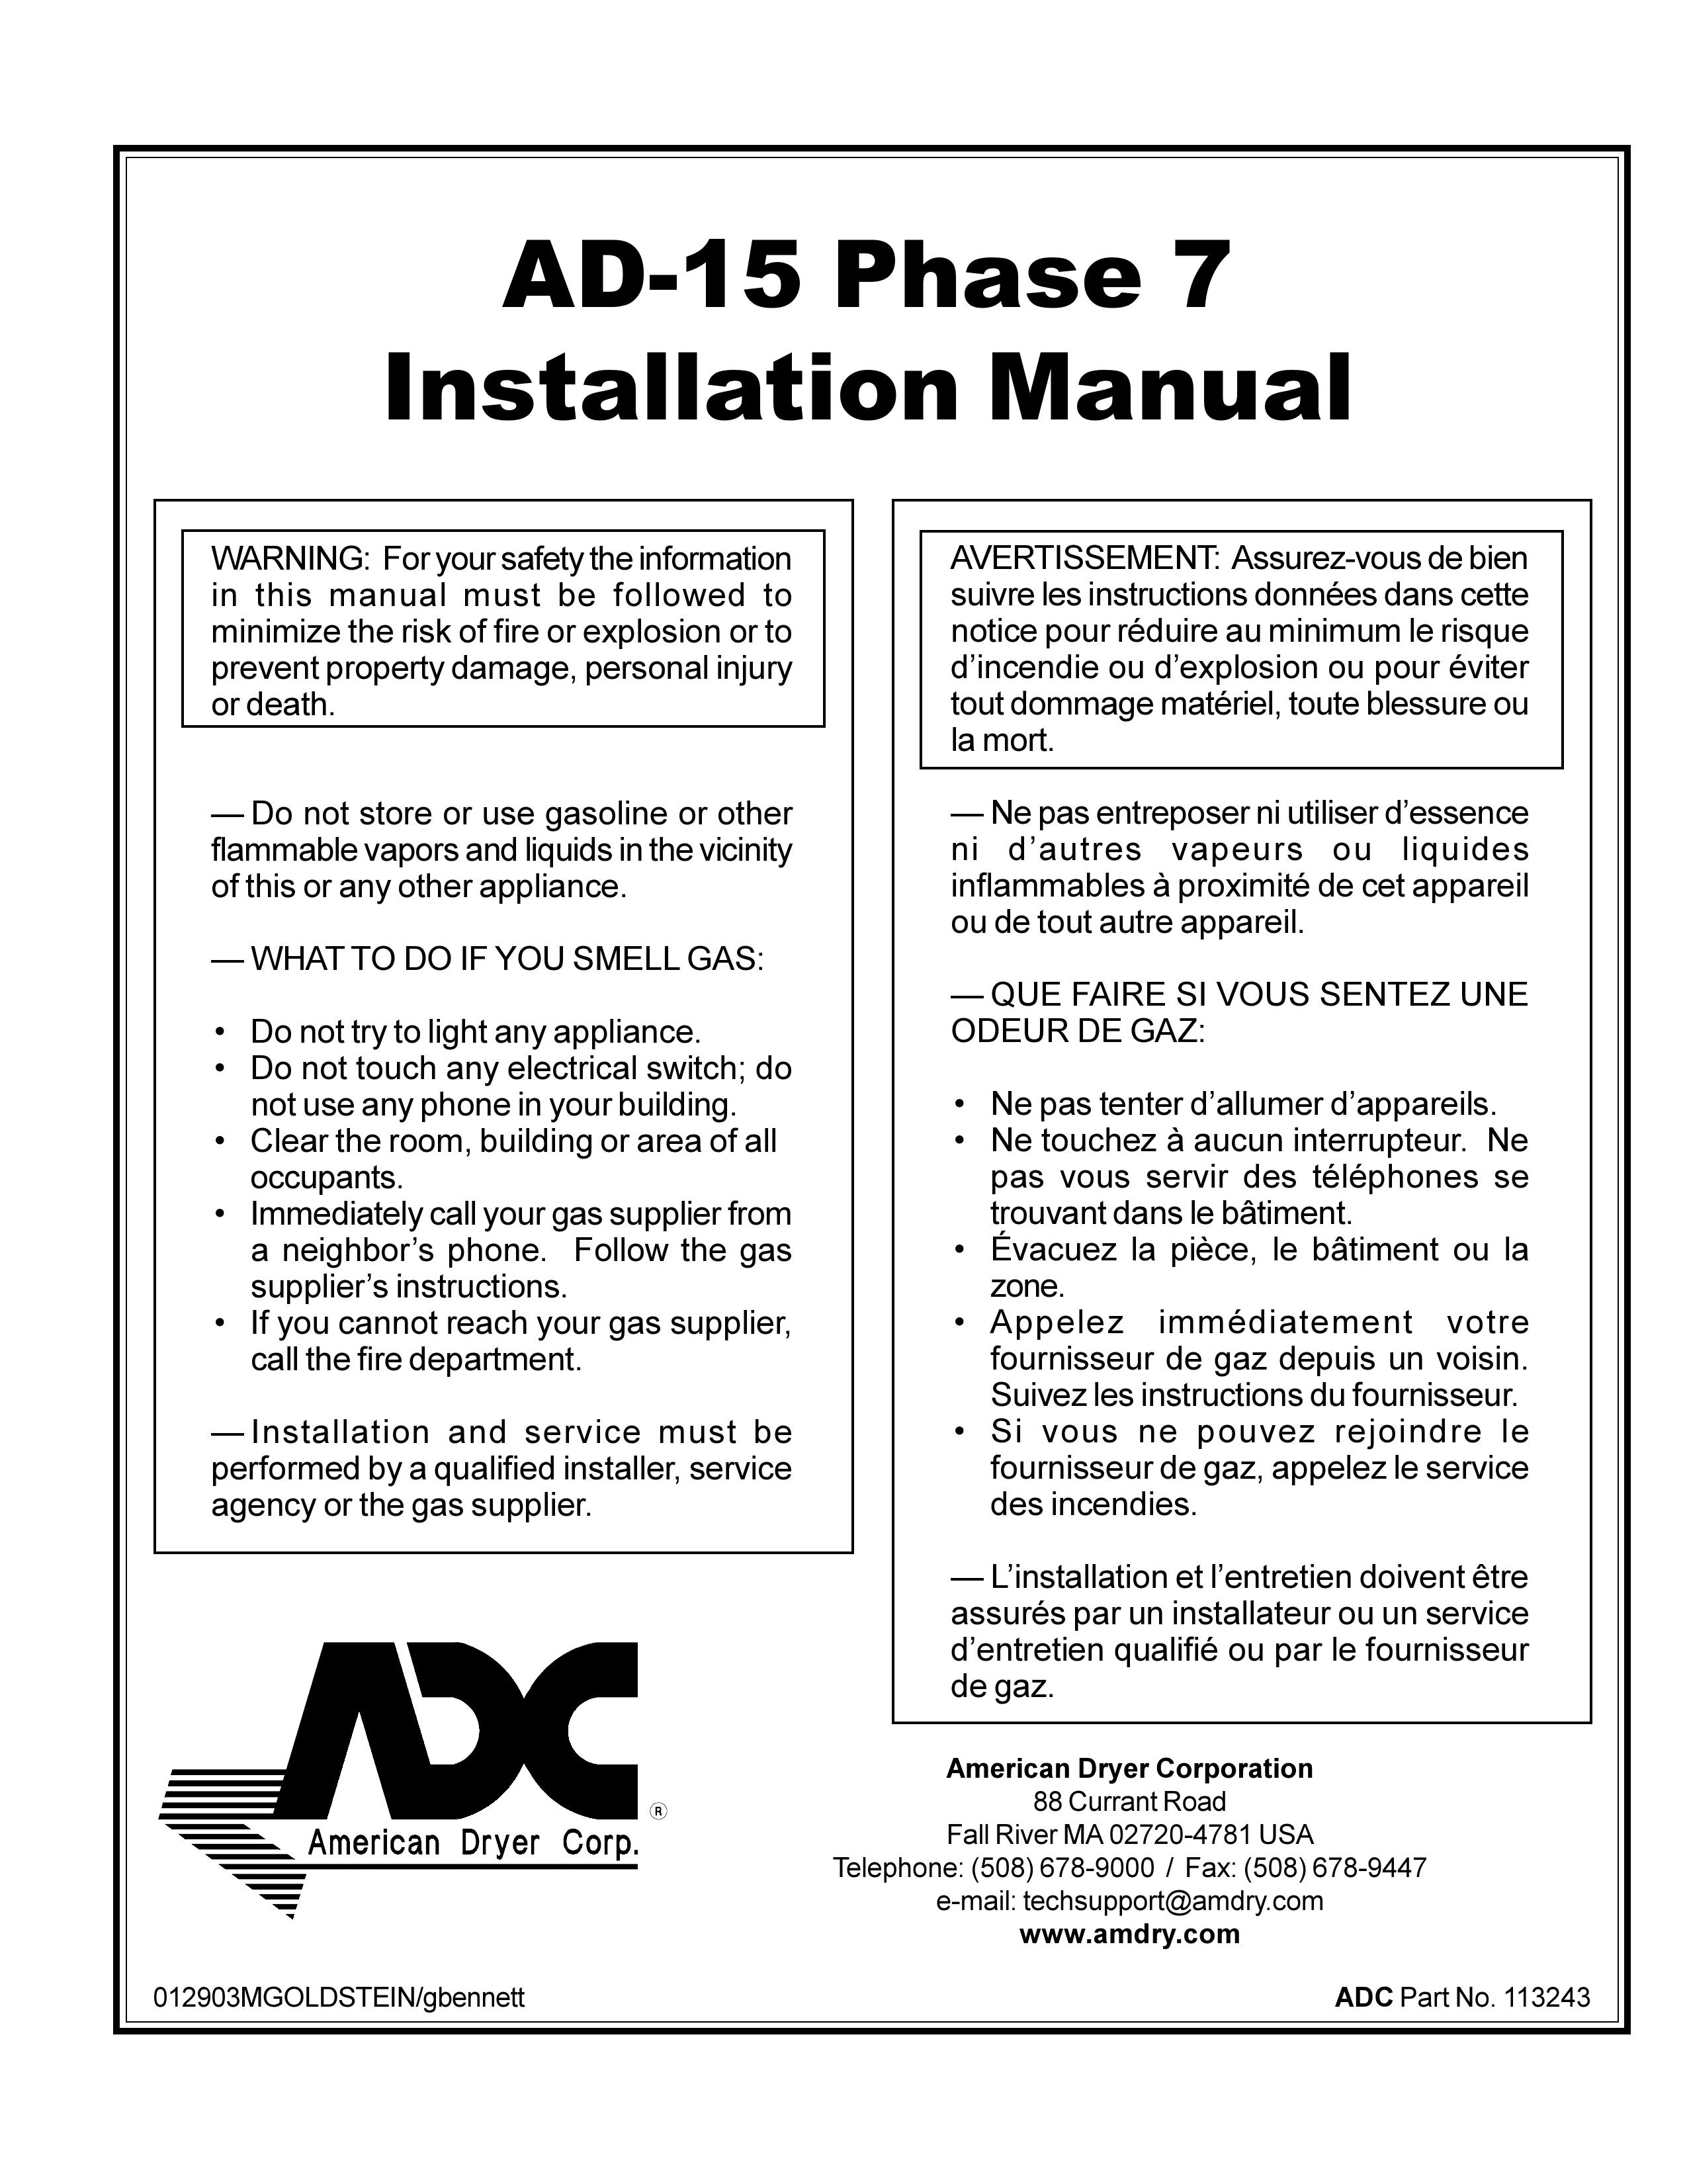 American Dryer Corp. AD-15 Phase 7 Clothes Dryer User Manual